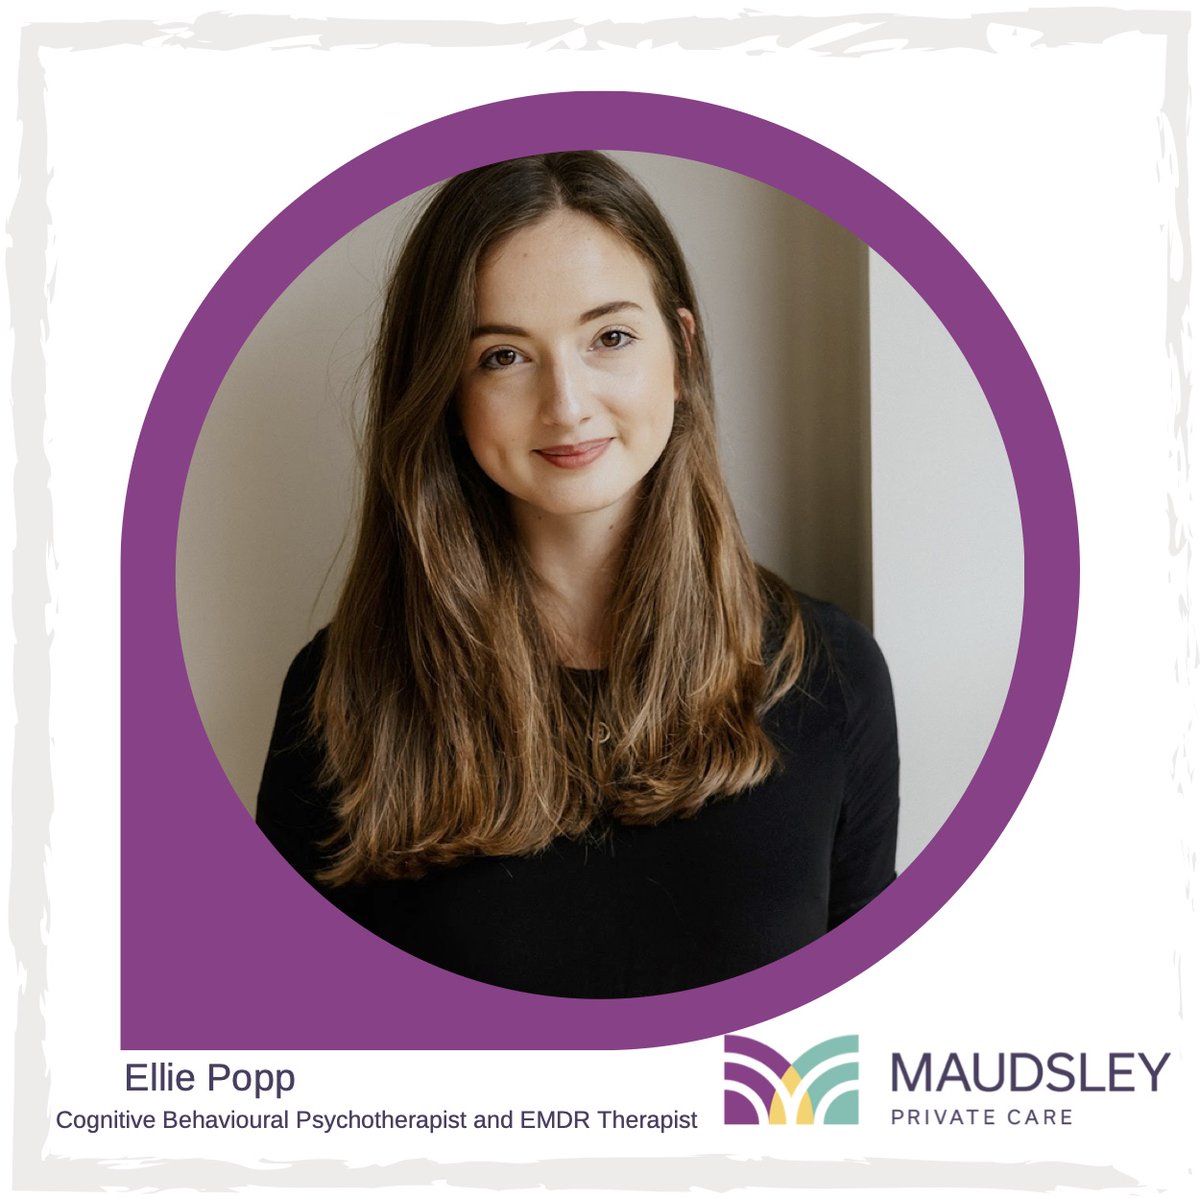 Welcome Dr. Ellie Popp to our service! She specialises in adult mental health, including anxiety disorders, PTSD, OCD, and panic disorder. She's also EMDR trained to help process past events. #mentalhealth #anxietyrelief #PTSDsupport #OCDawareness #panicdisorder #EMDRtherapy